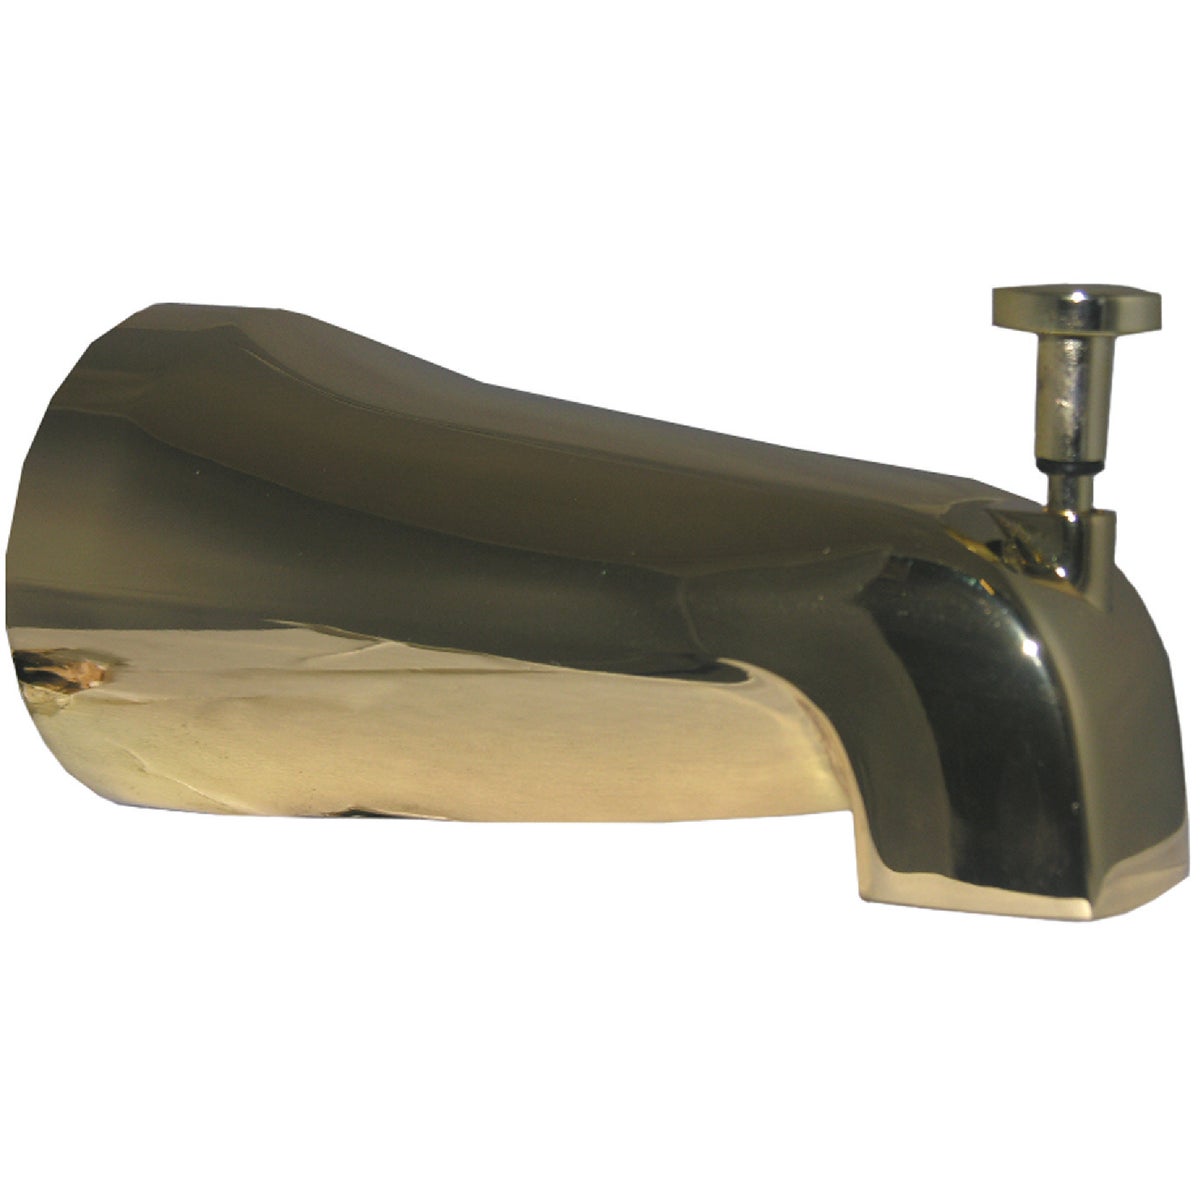 Lasco 1/2 In. FPT Polished Brass Bathtub Spout with Diverter